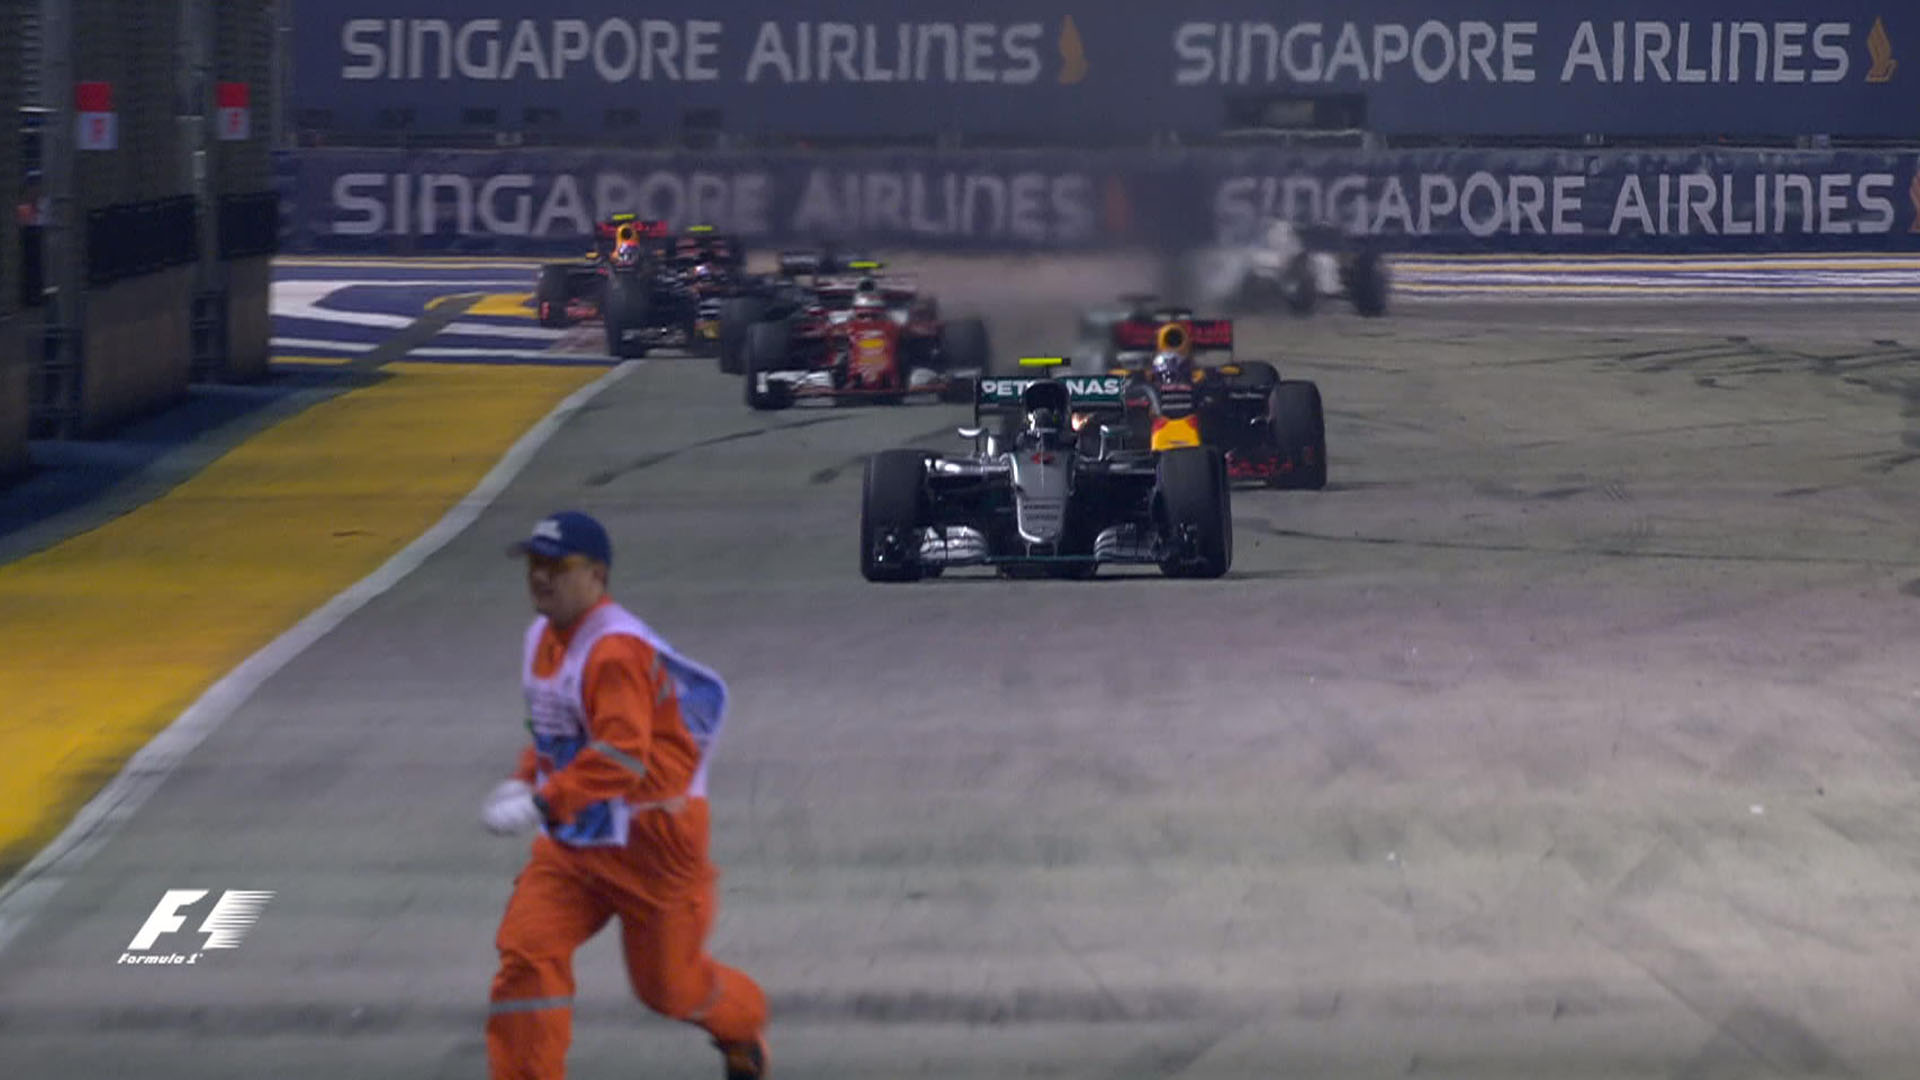 Nico Rosberg almost takes out a safety Marshal in Singapore